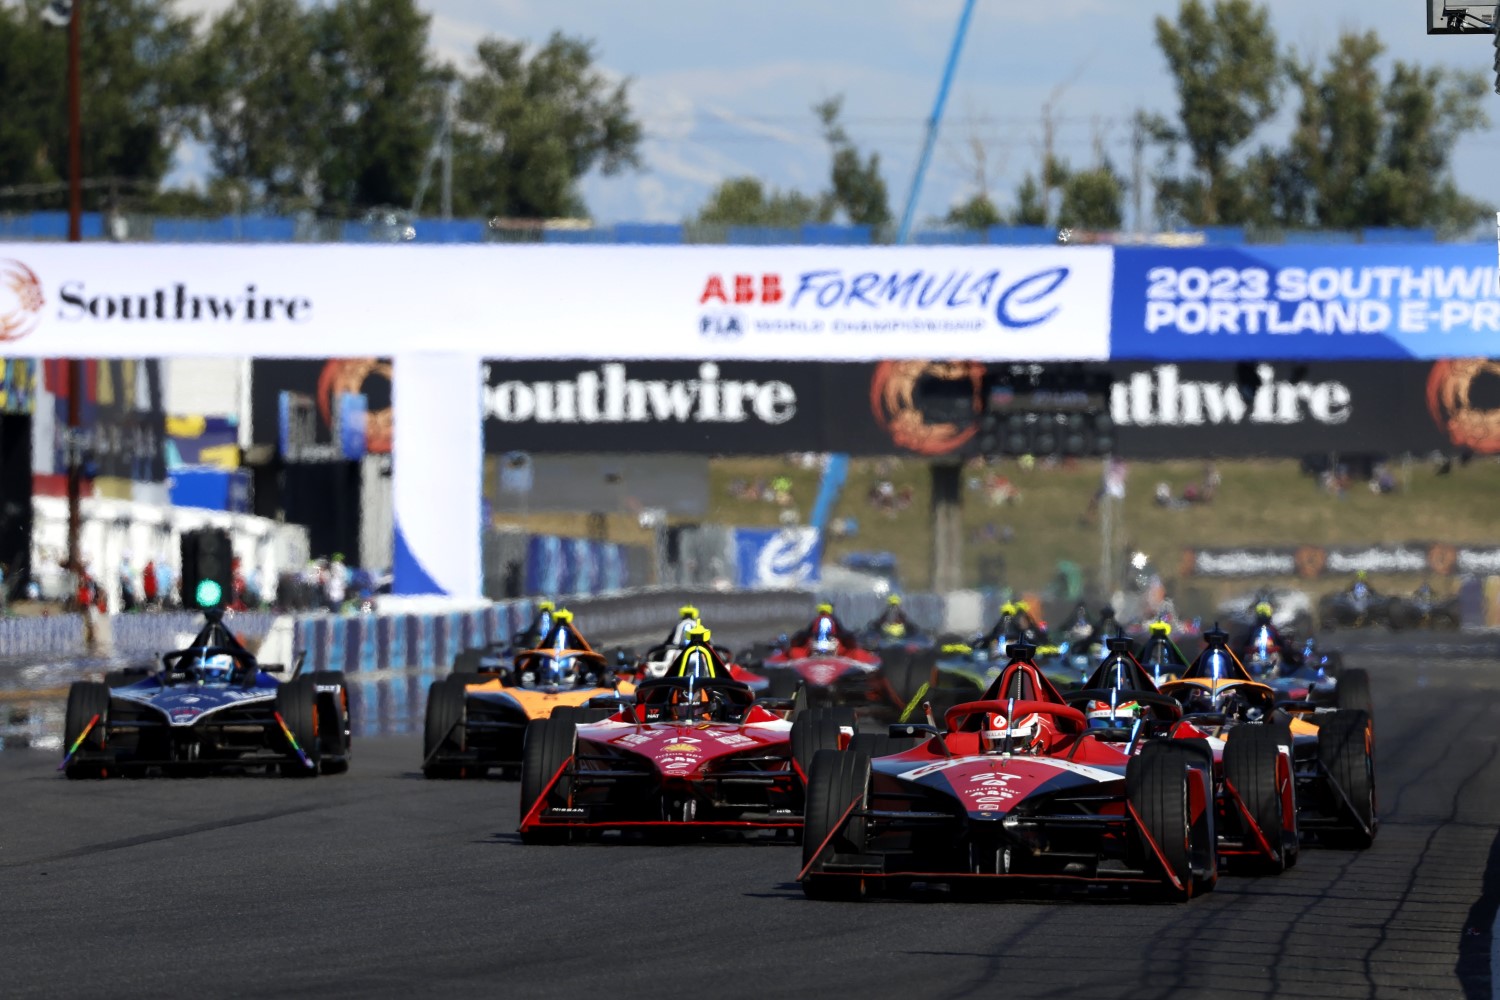 PORTLAND INTERNATIONAL RACEWAY, UNITED STATES OF AMERICA - JUNE 24: Jake Dennis, Avalanche Andretti Formula E, Porsche 99 X Electric Gen3 Leads at the start during the Portland at Portland International Raceway on Saturday June 24, 2023 in Portland, United States of America. (Photo by Sam Bloxham / LAT Images)